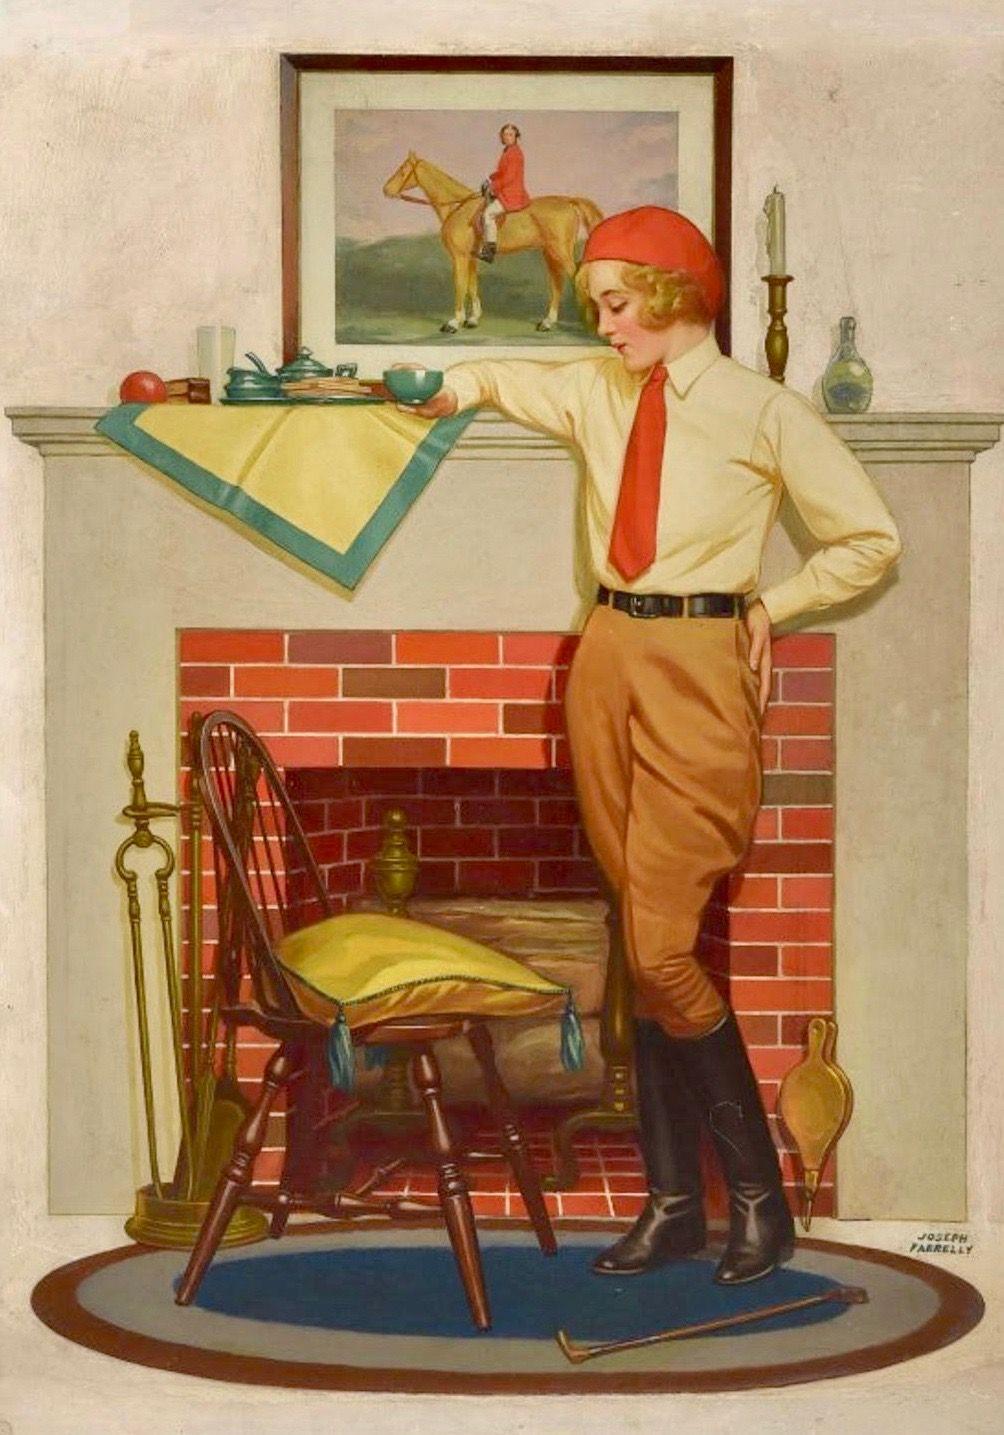 Joseph Farrely Figurative Painting – Maclean's Magazincover, 1930